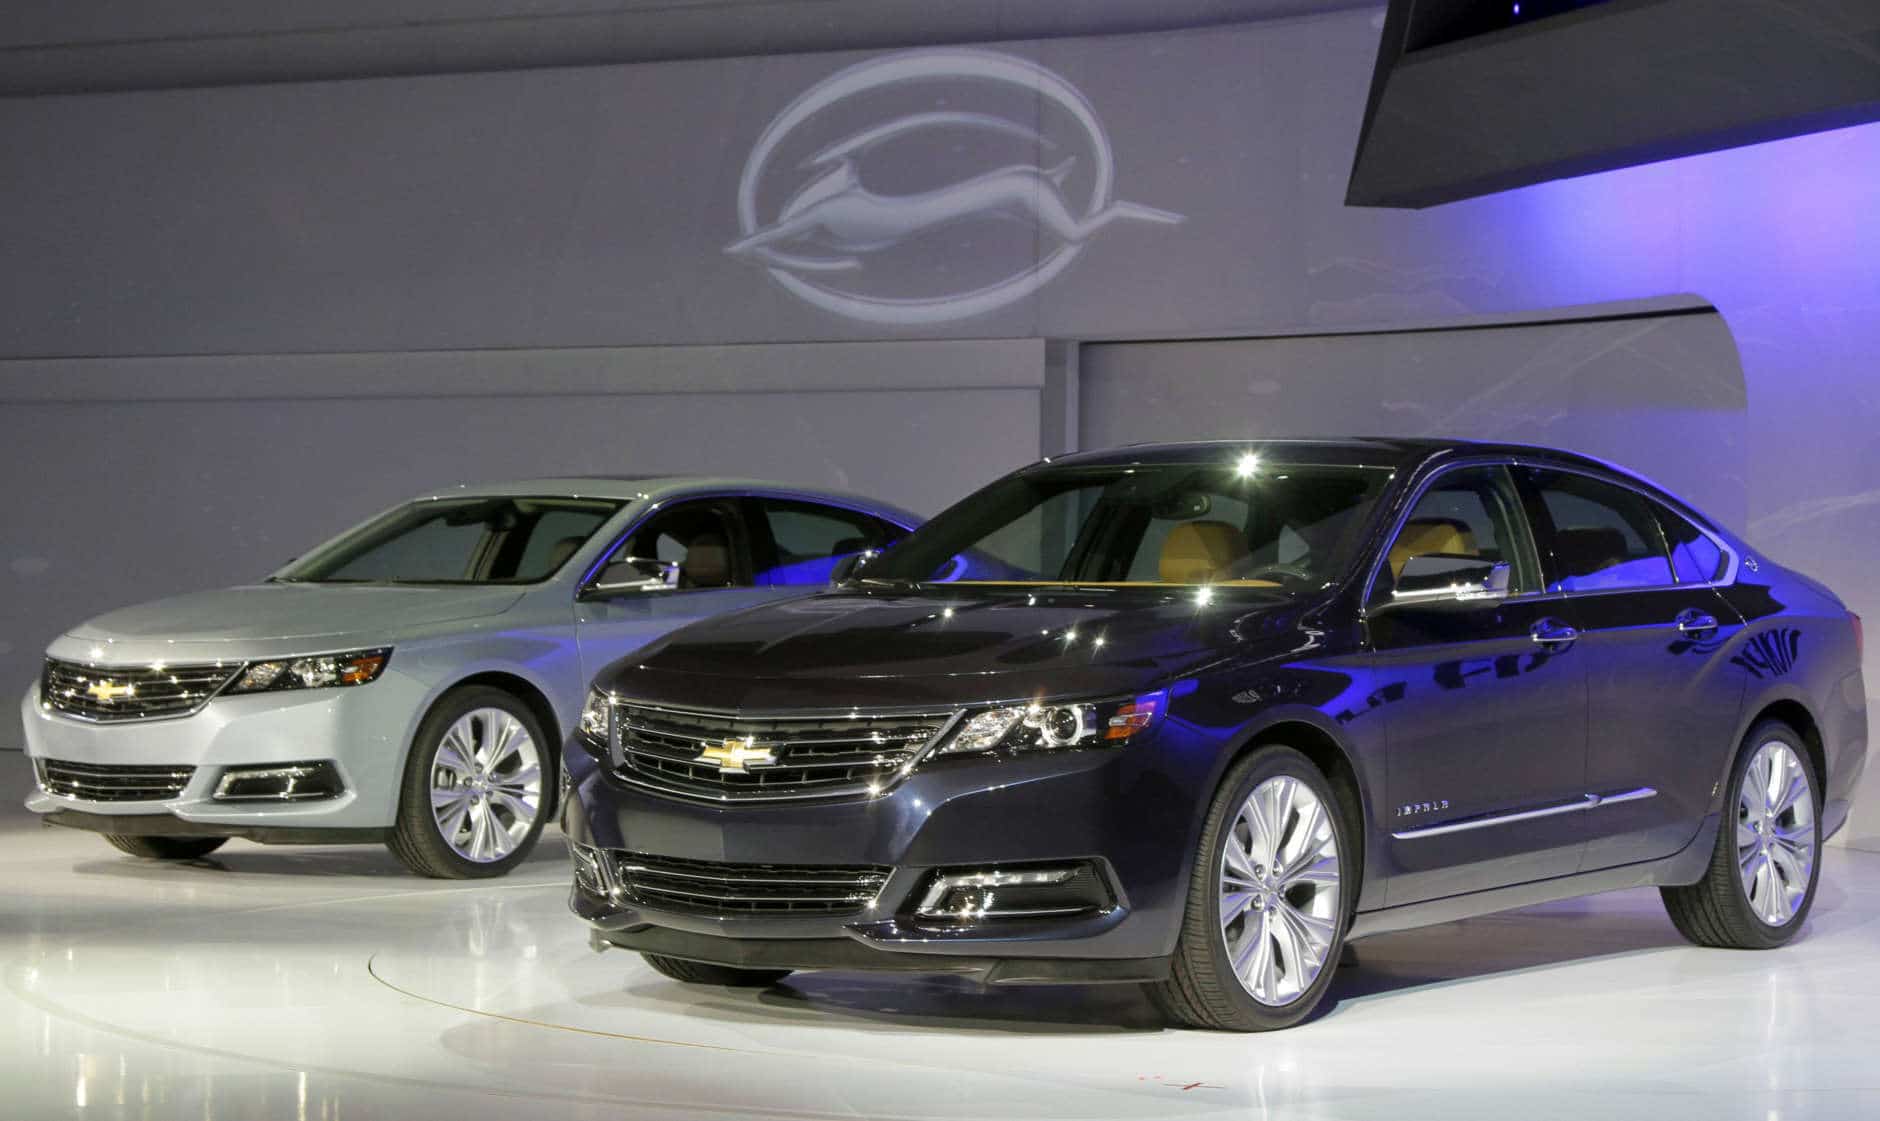 Two 2013 Chevrolet Impalas are unveiled at the New York International Auto Show, in New York's Javits Center,  Wednesday, April 4, 2012. General Motors Co.'s Chevrolet brand is trying to resuscitate sales of big sedans with a sleek, new version of the Impala. (AP Photo/Richard Drew)